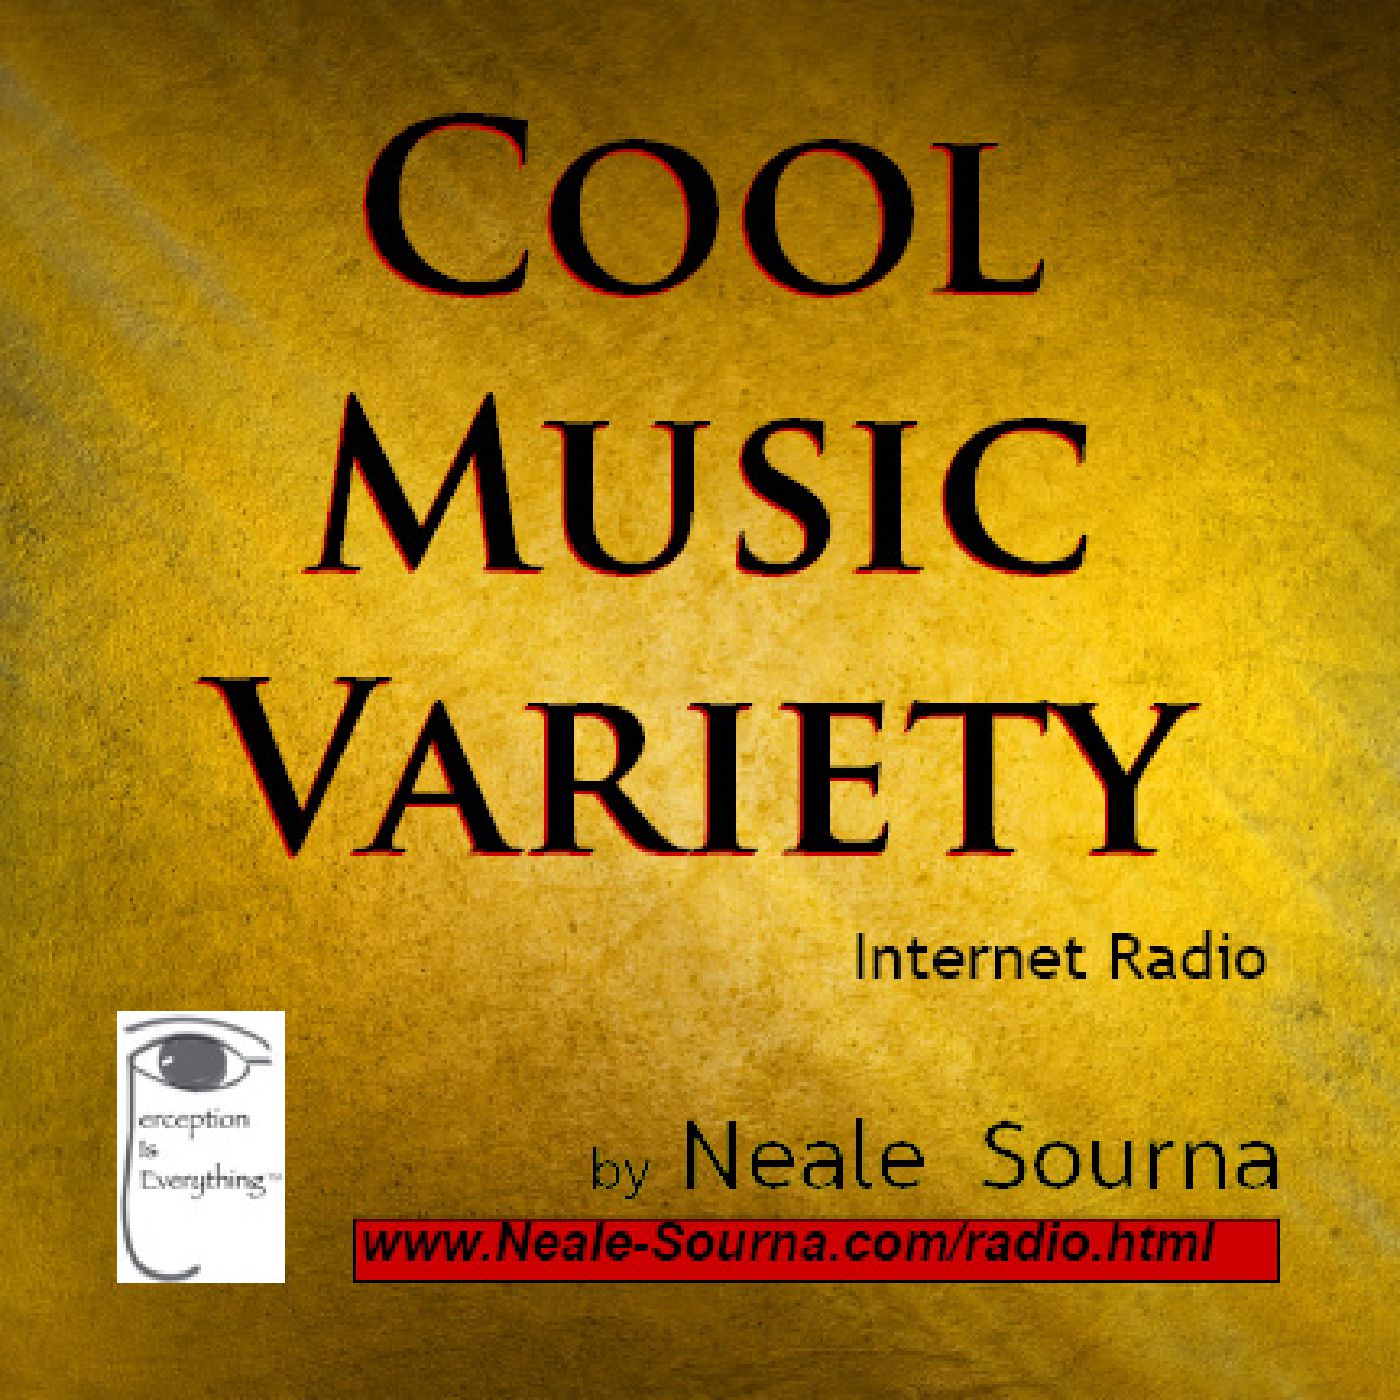 Image for Cool Music Variety Radio by Neale Sourna